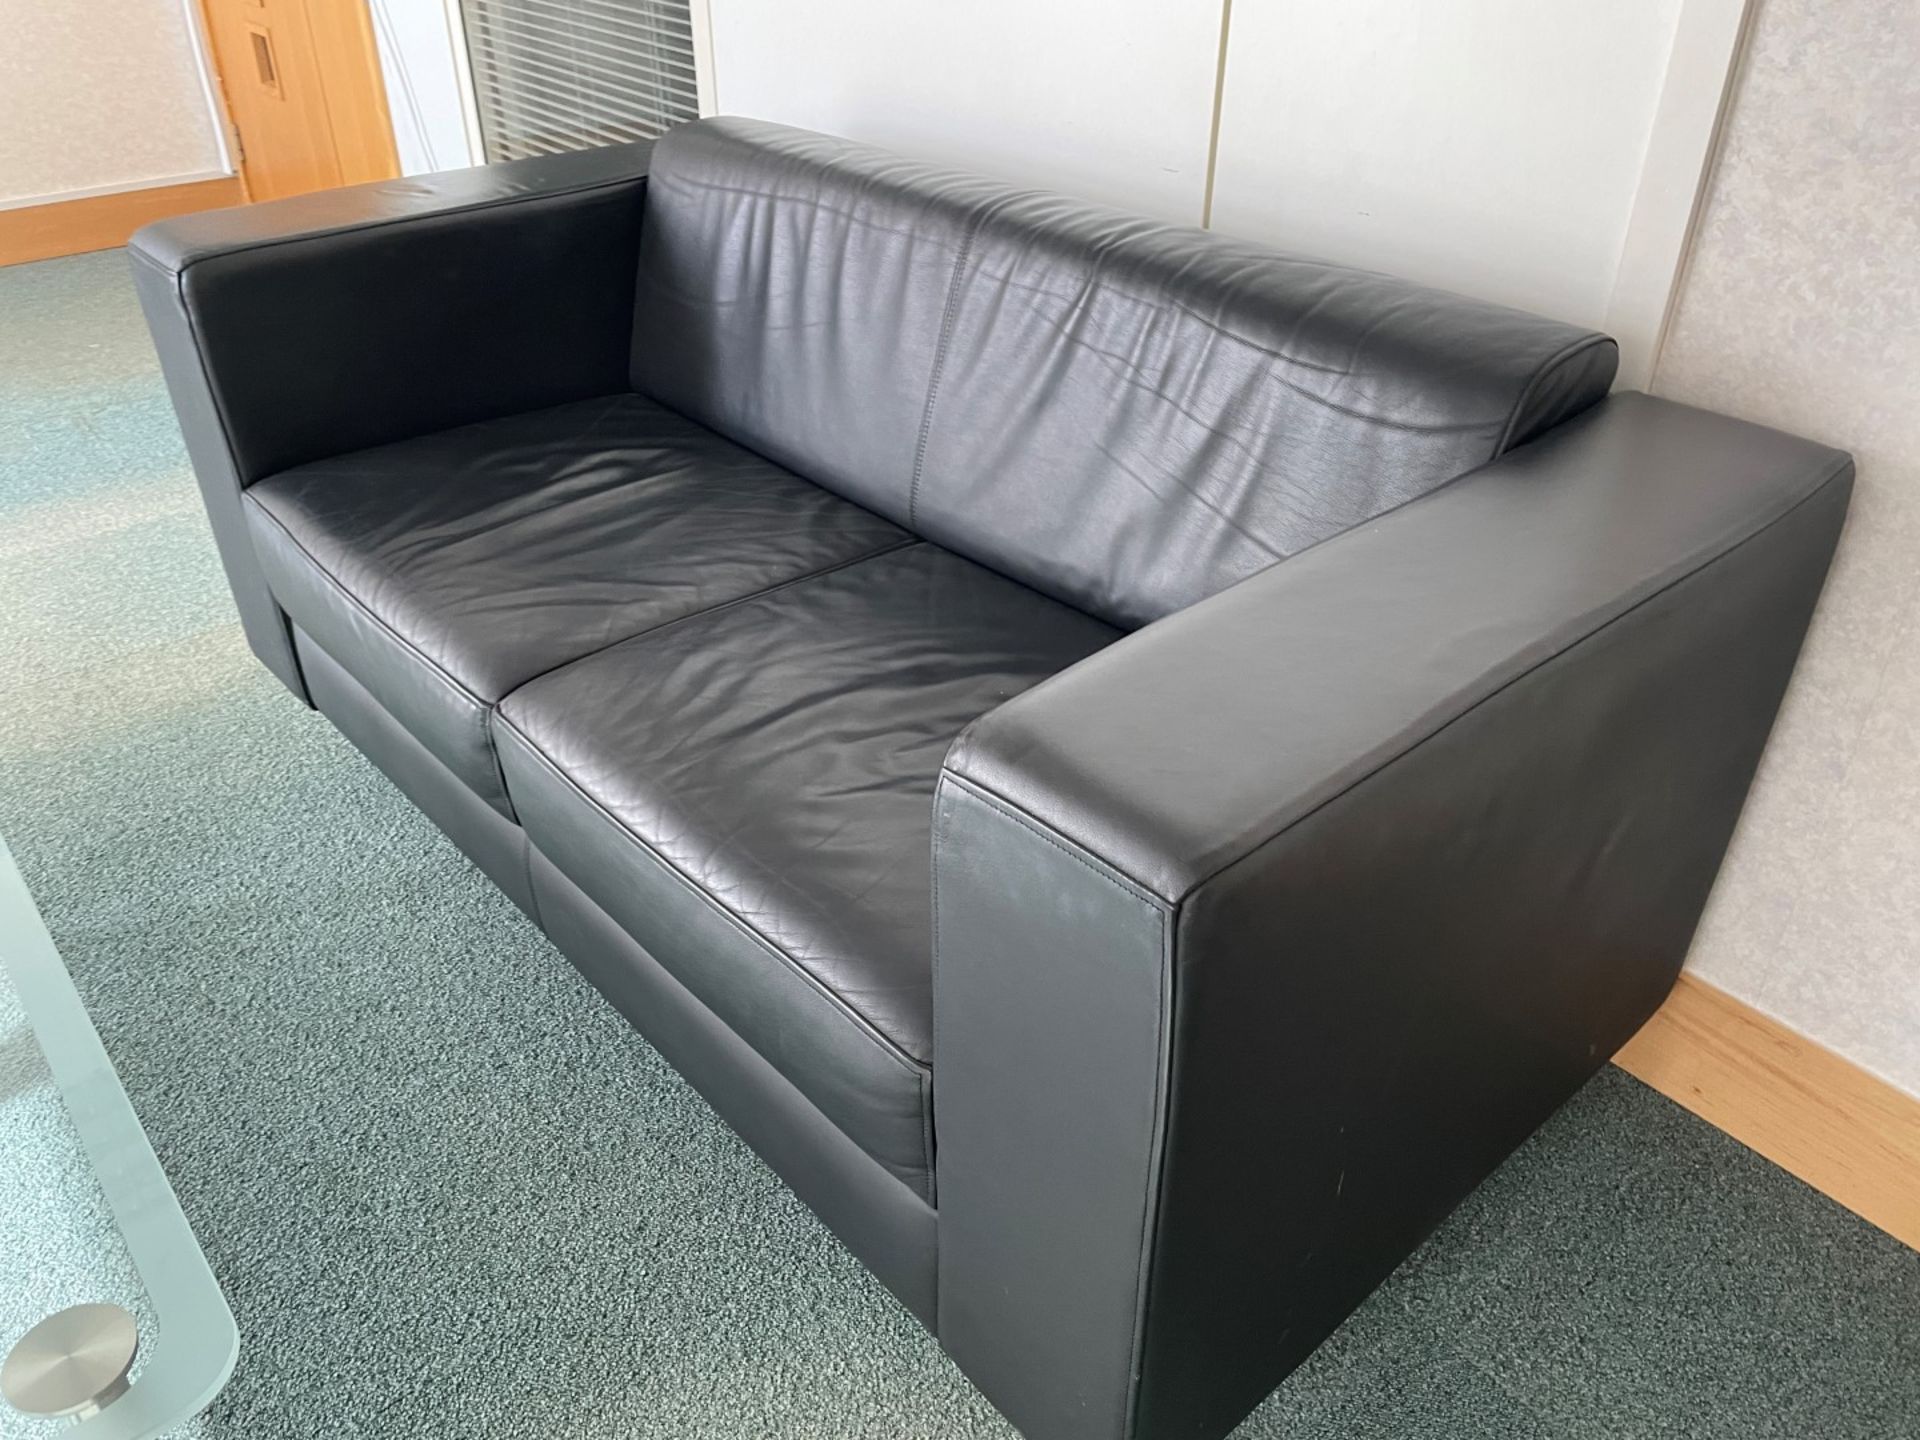 1 x Black 2-Seater Sofa With Glass Table - Dimensions: Sofa W160 x D80 x H73cm / Table W120 x D60 x - Image 4 of 5